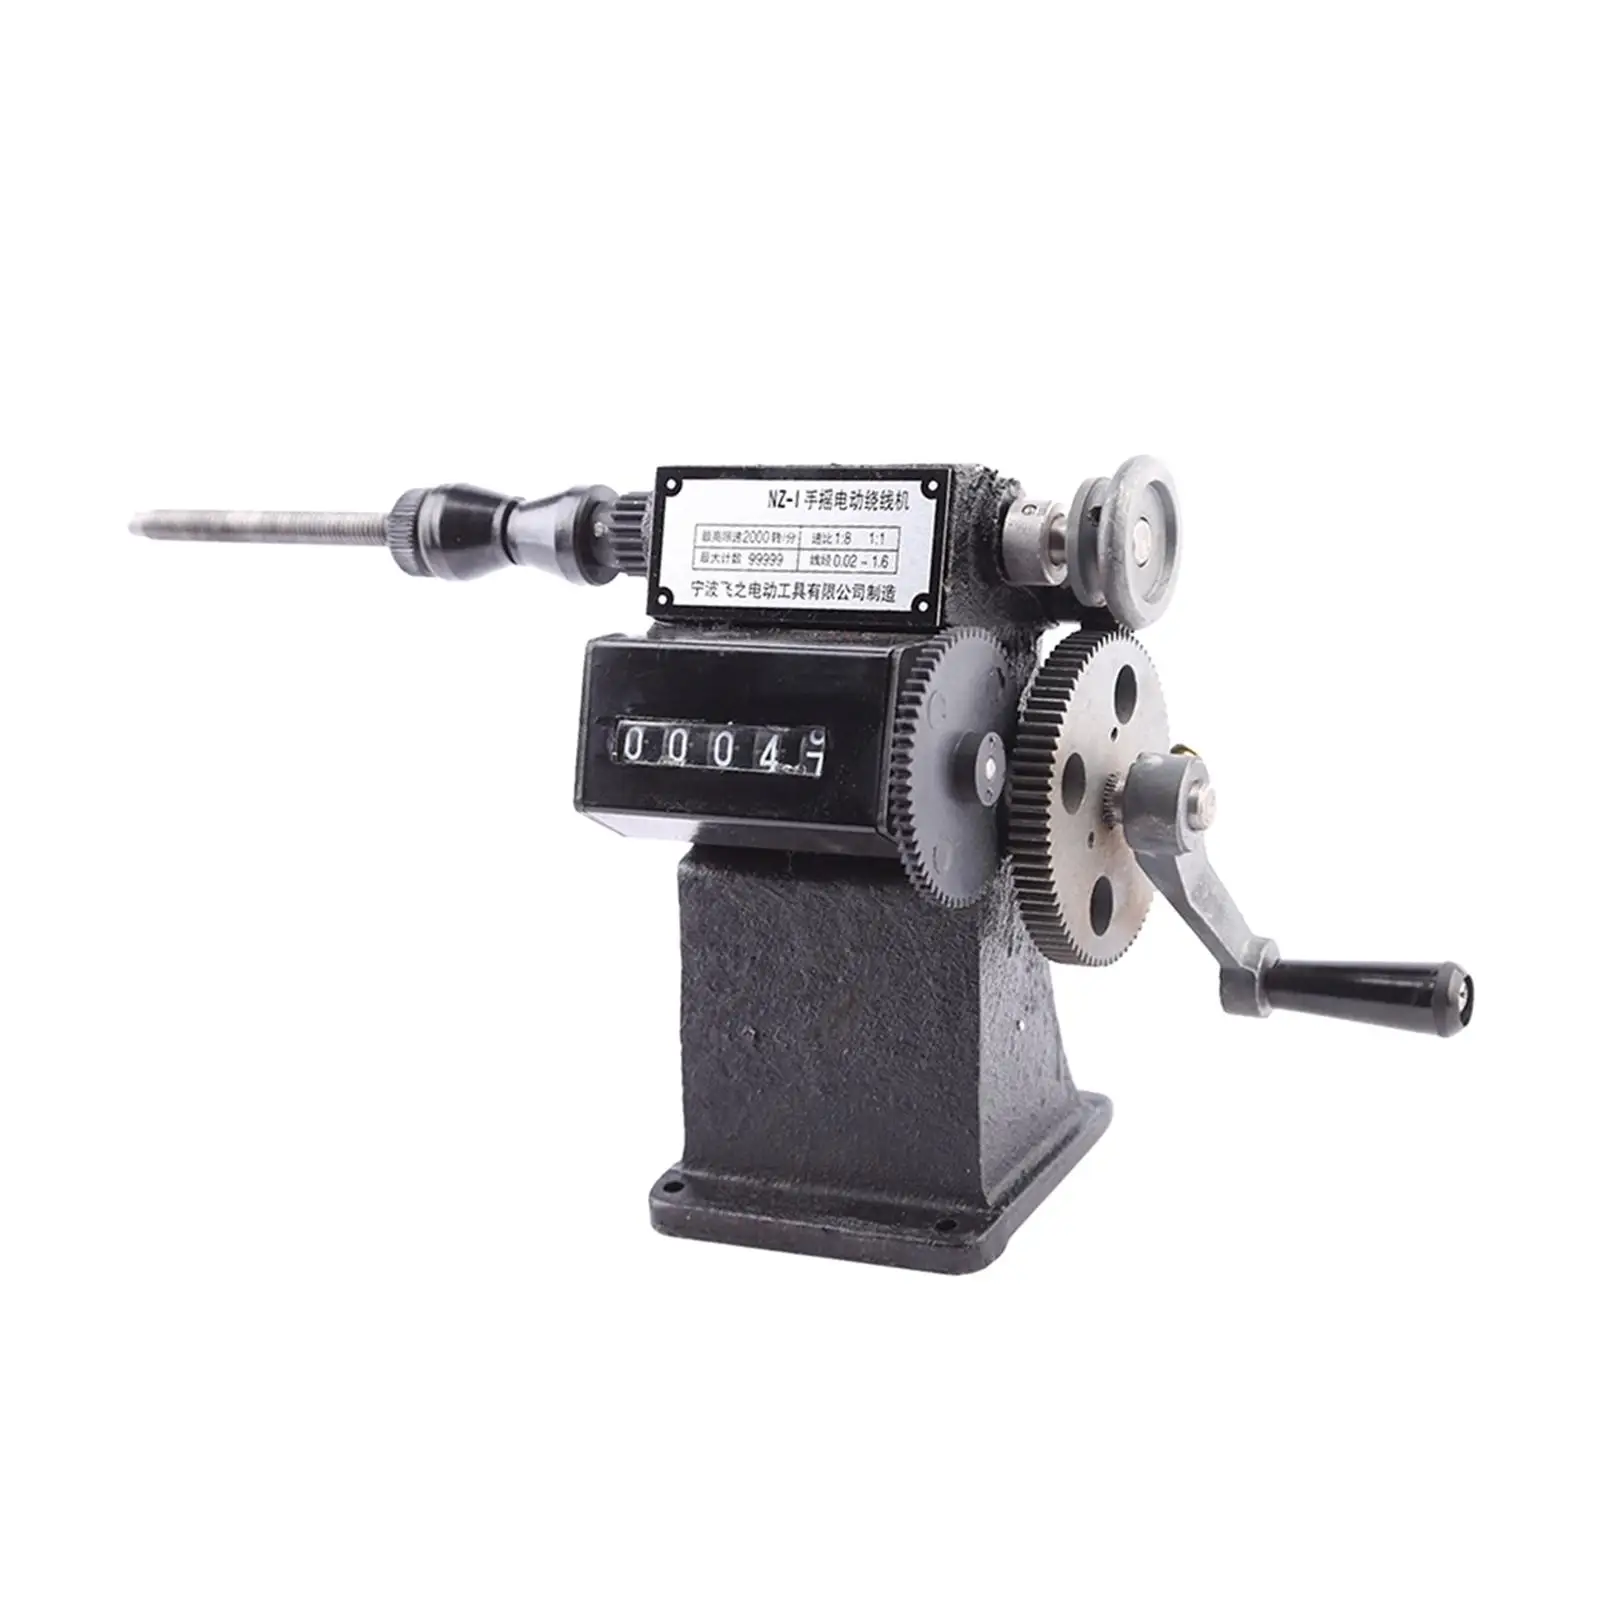 Manual Coil Winder Machine Counter Number Counting 0-9999 for Fishing Wire